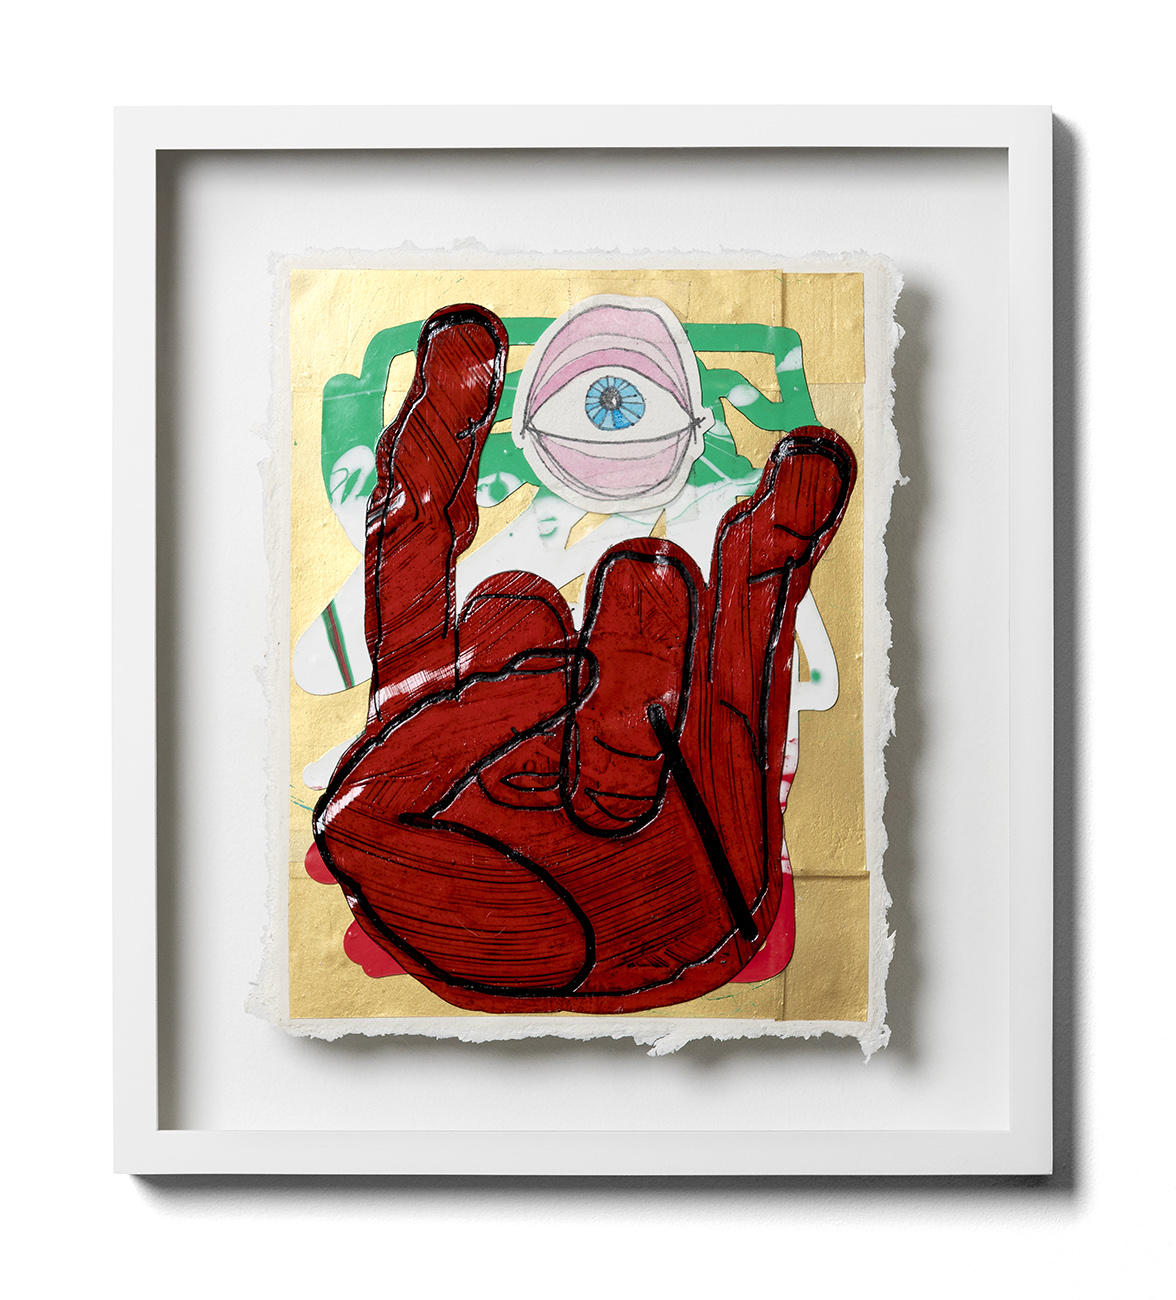 A hand drawn red hand gesture in a white frame

Description automatically generated